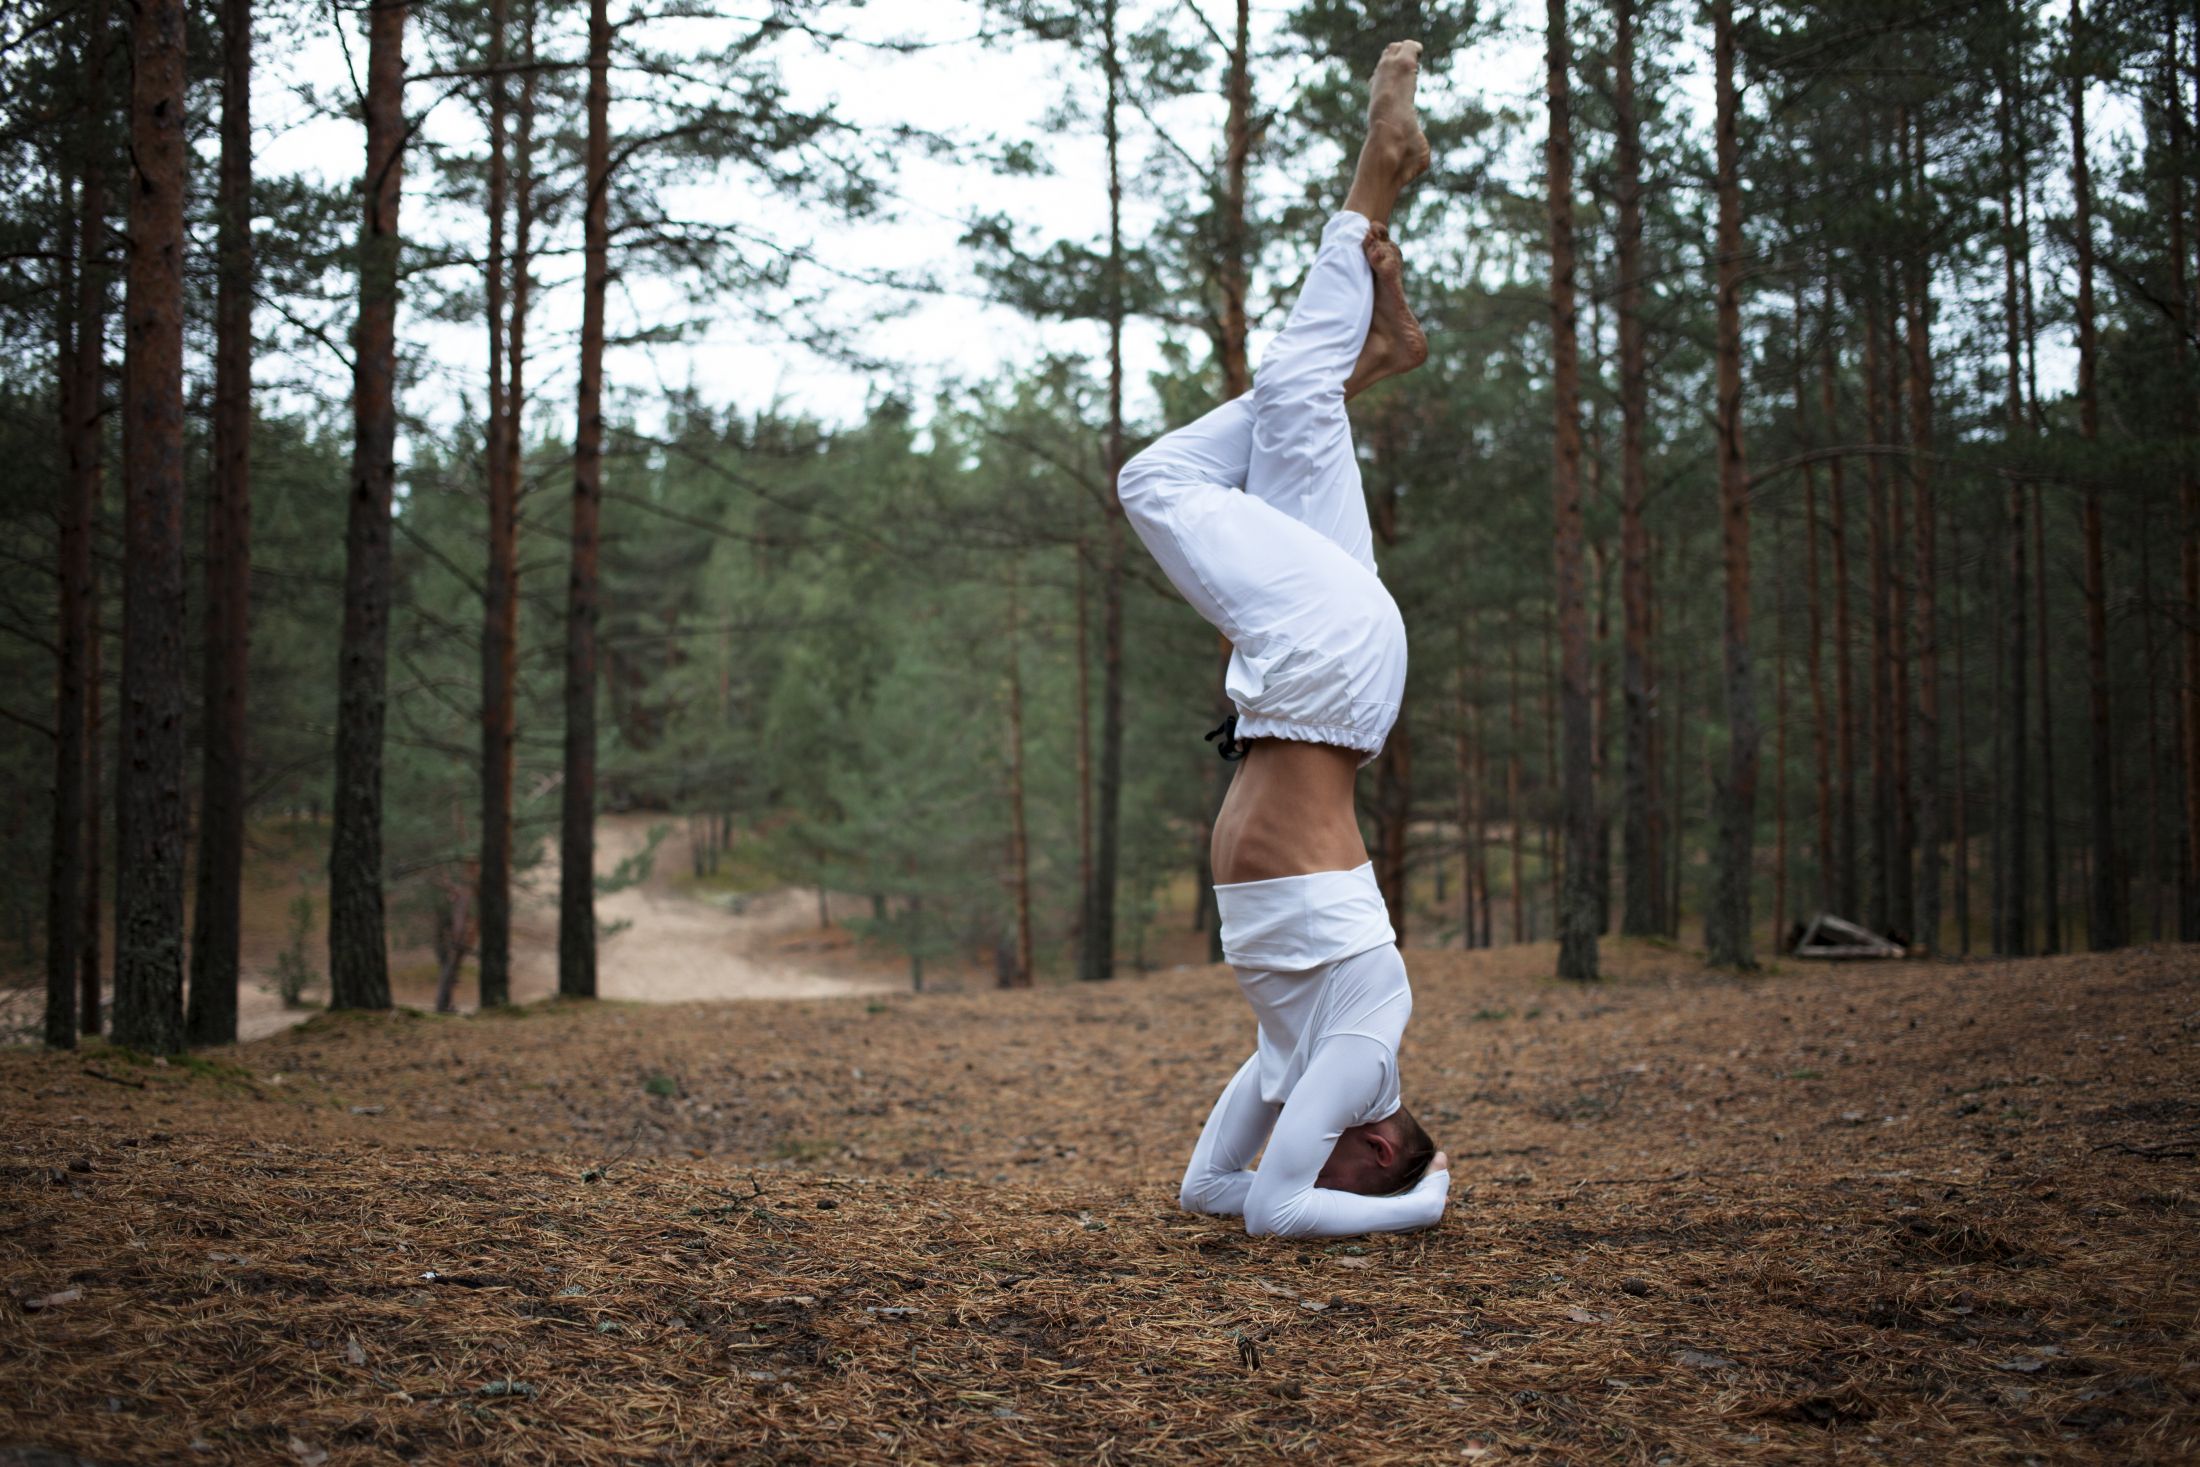 barefooted-young-male-in-white-clothes-doing-variation-of-salamba-shirshasana-yoga-stance-on-ground-in-forest-crossing-legs-outdoor-shot-of-advanced-yogi-training-in-woods-balancing-on-hands (1).jpg